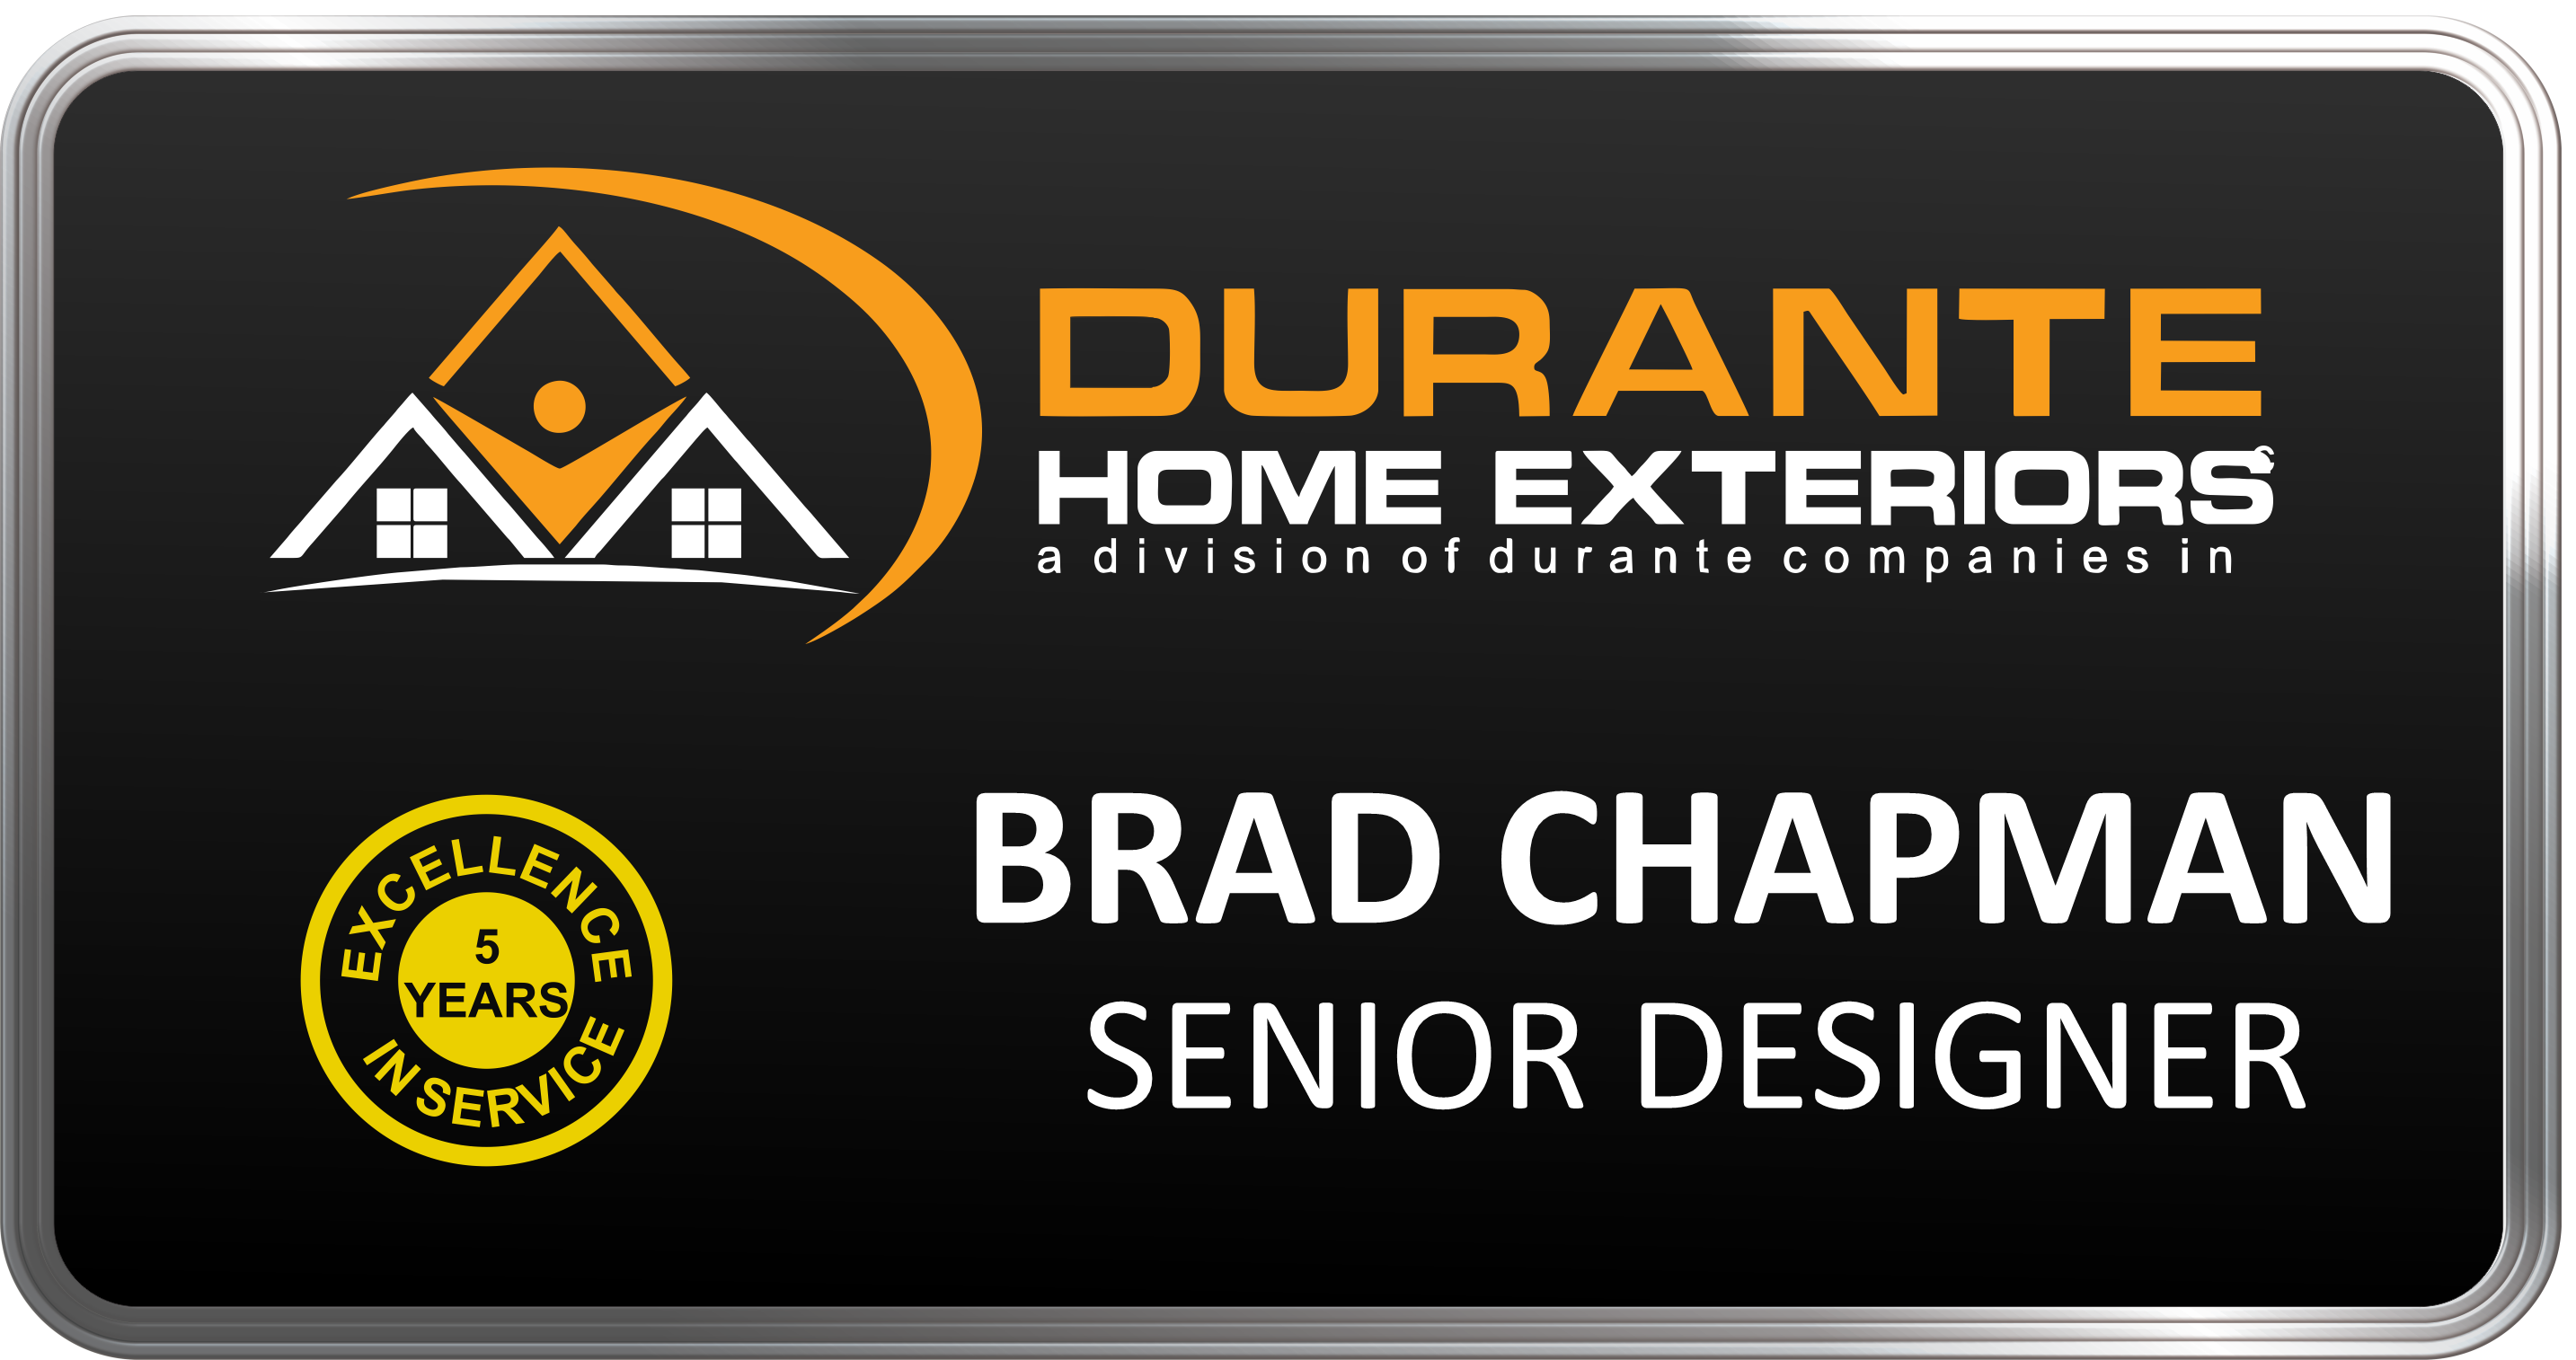 Employee name badge featuring logo for Durante Home Exteriors